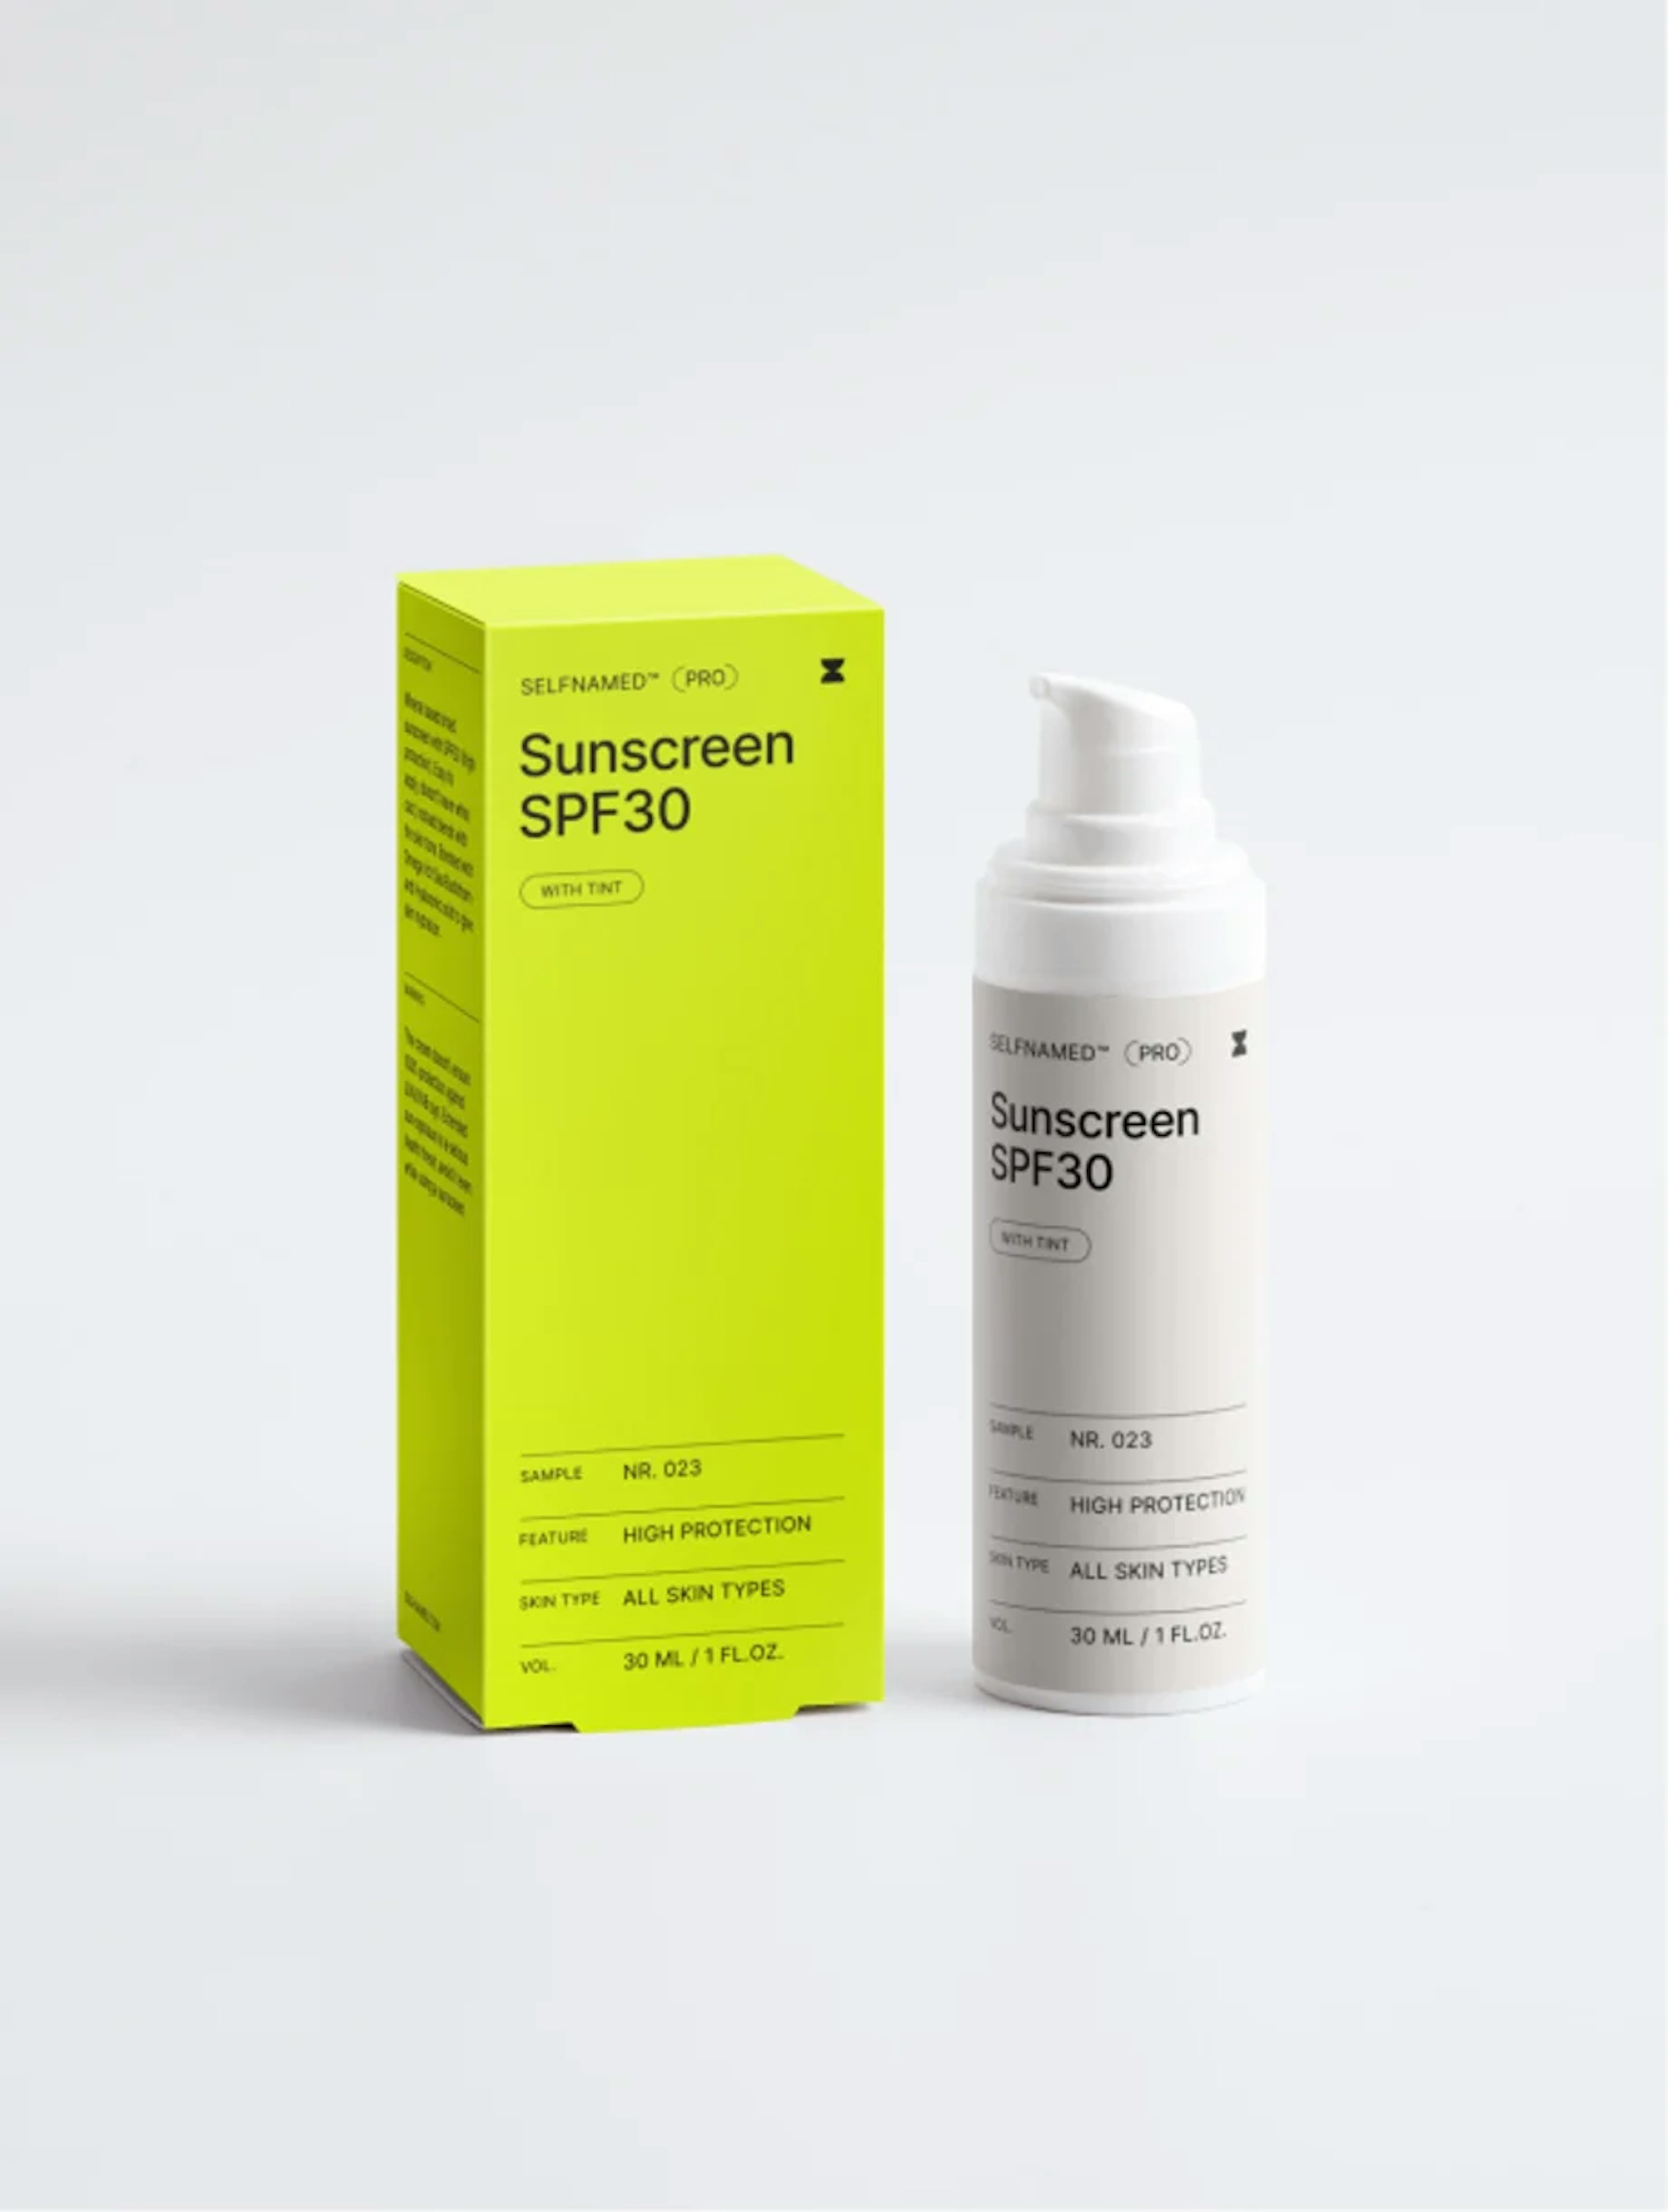 Sunscreen with branded box and tube